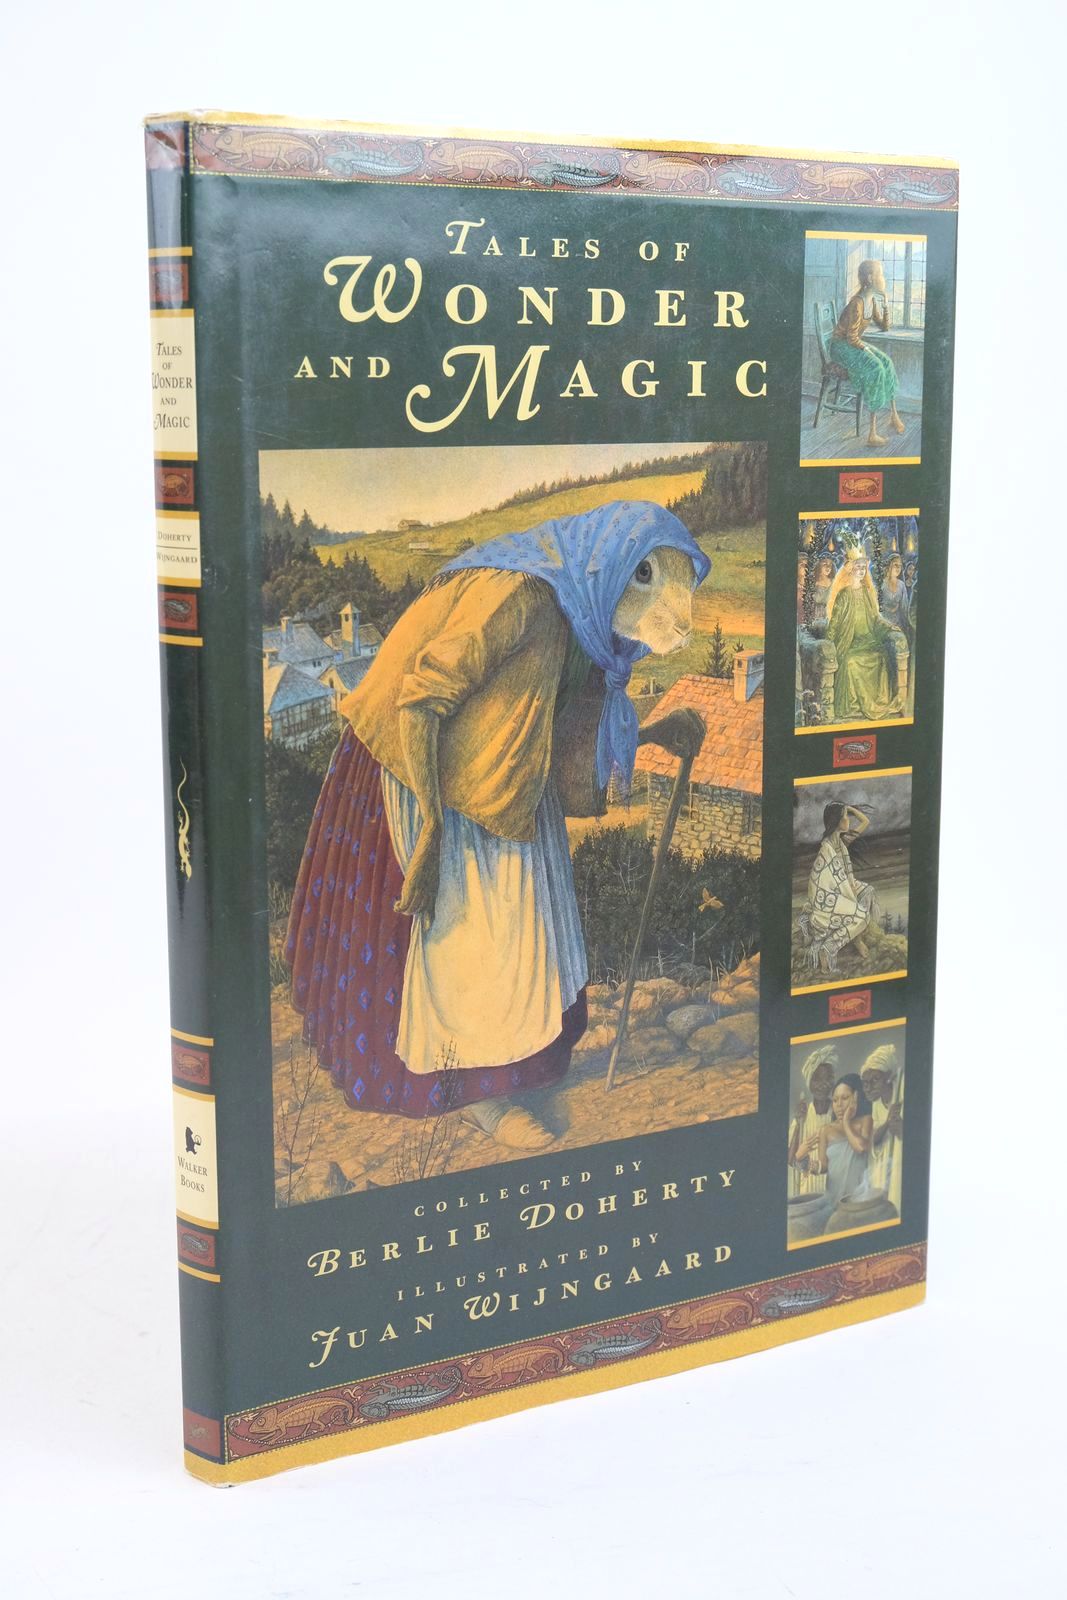 Photo of TALES OF WONDER AND MAGIC written by Doherty, Berlie illustrated by Wijngaard, Juan published by Walker Books (STOCK CODE: 1321203)  for sale by Stella & Rose's Books